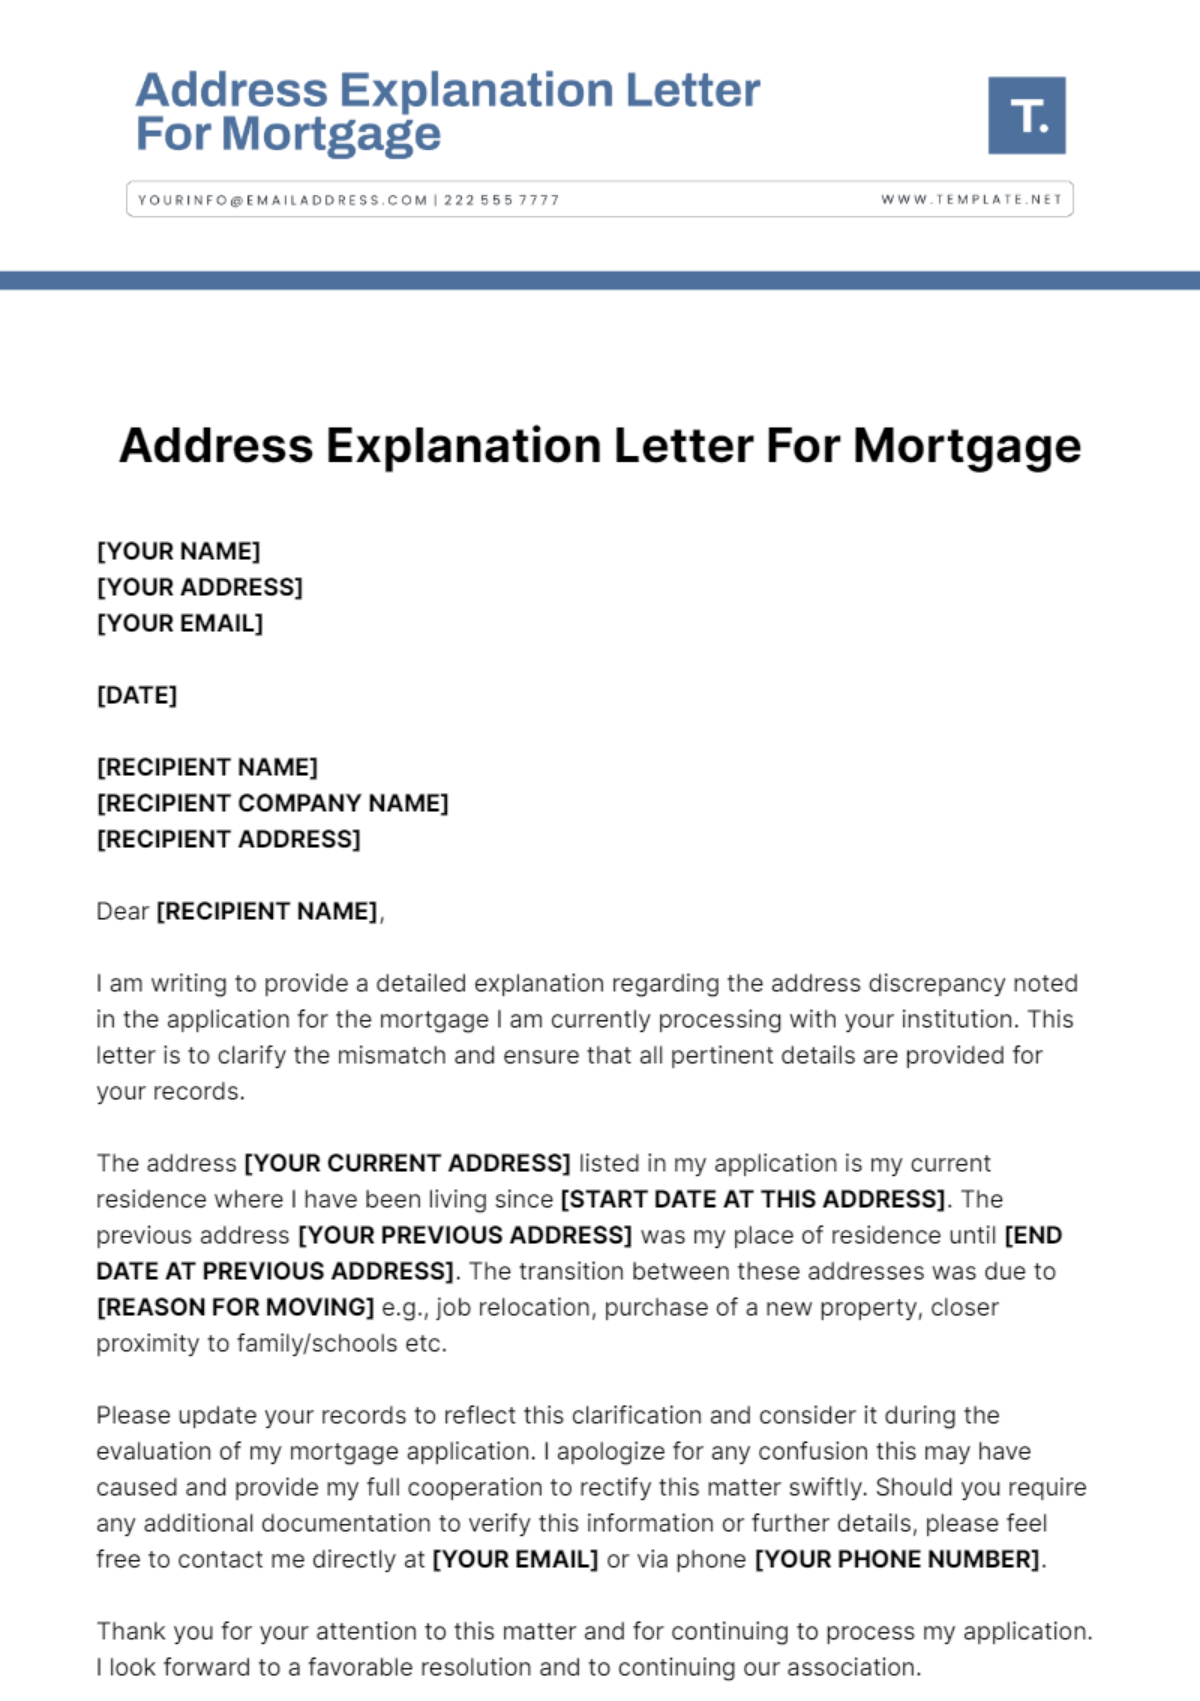 Address Explanation Letter For Mortgage Template